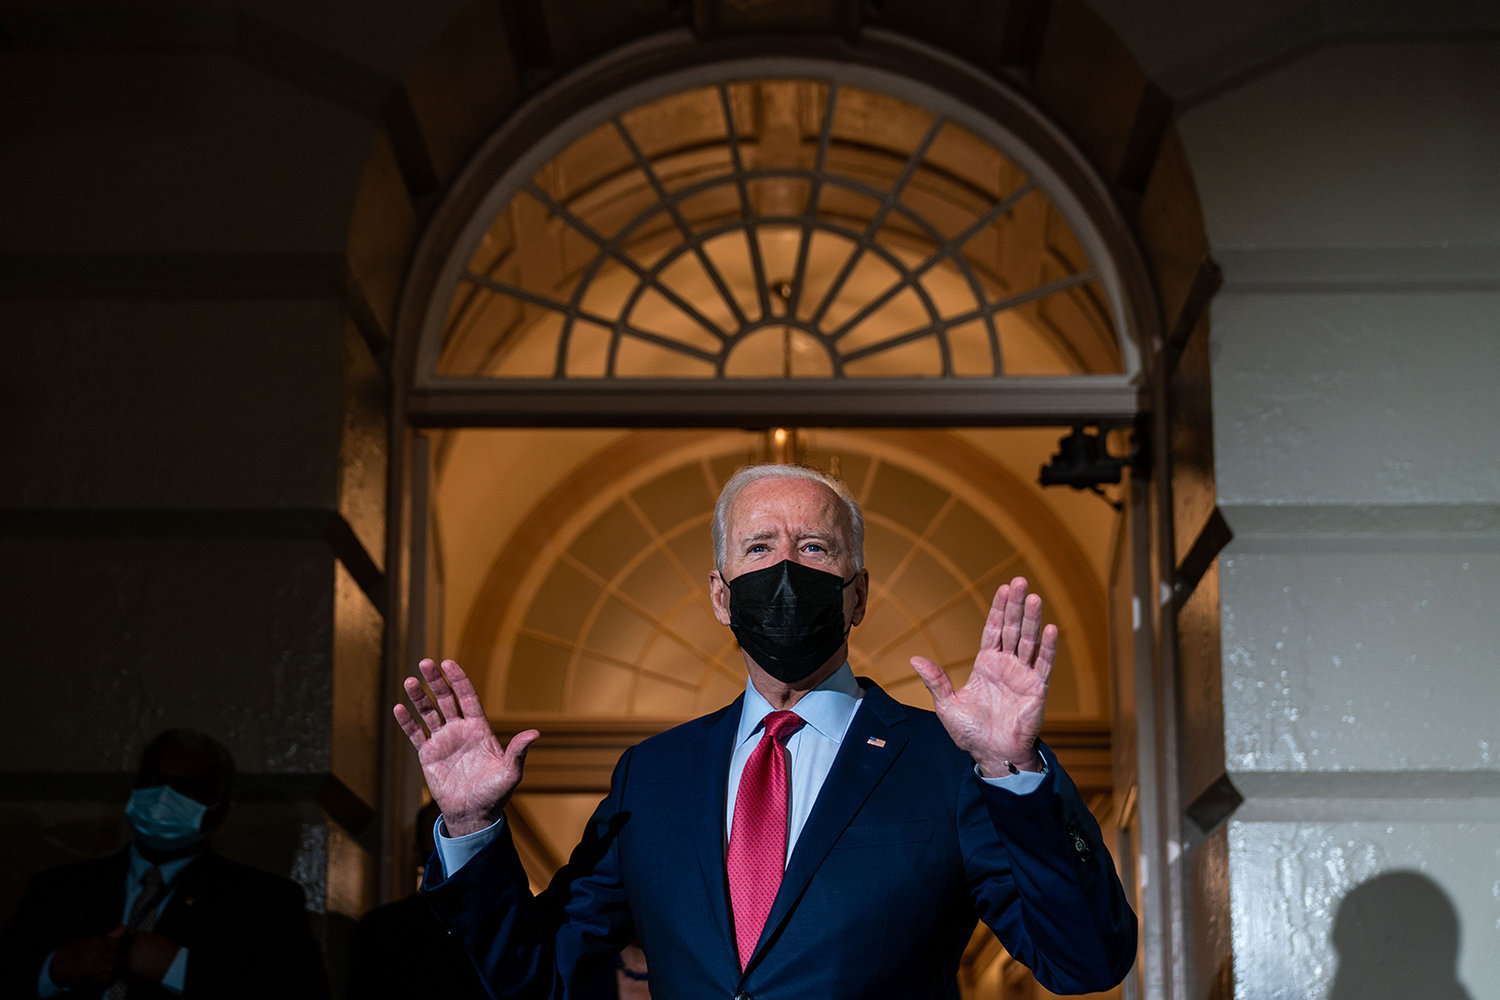 President Joe Biden leaves a House Democratic Caucus meeting in the U.S. Capitol on Friday, Oct. 1, 2021 in Washington, D.C. The president called the meeting in order to push through an impasse with his $1 trillion infrastructure plan. (Kent Nishimura/Los Angeles Times/TNS)